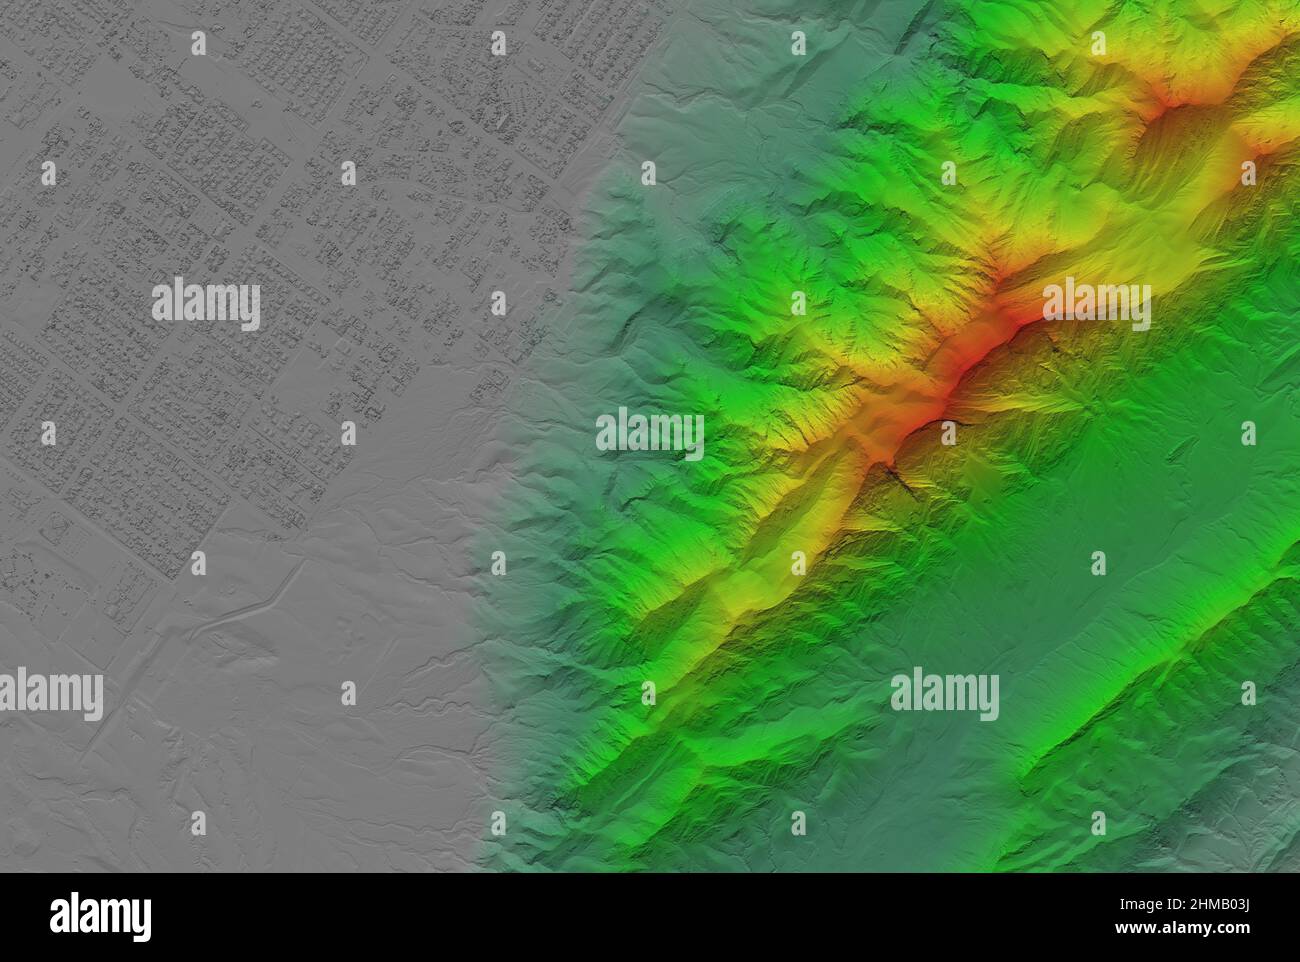 Digital elevation model. GIS 3D illustration made after proccesing aerial pictures taken from a drone. It shows lidar scanned, huge urban area of a ci Stock Photo